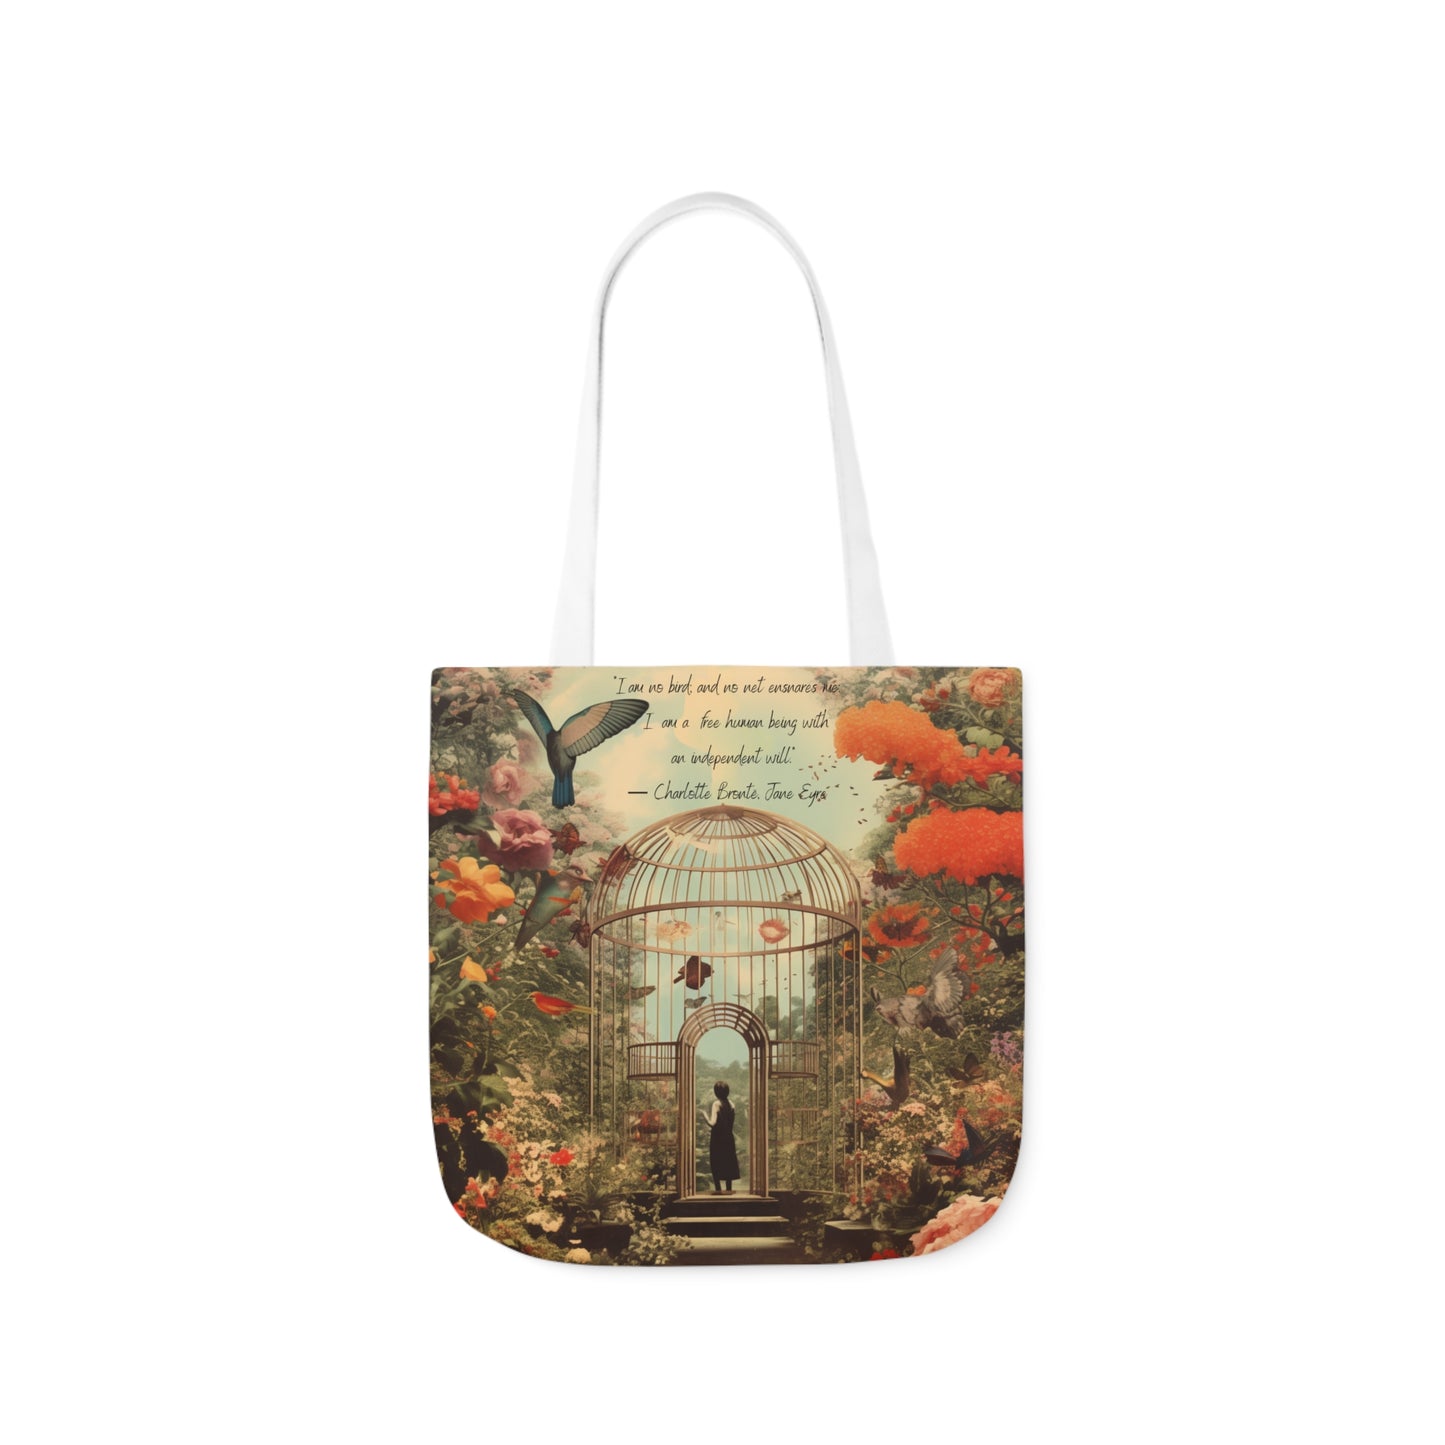 'I am not a bird' from Jane Eyre by Charlotte Bronte quote, Tote Bag,